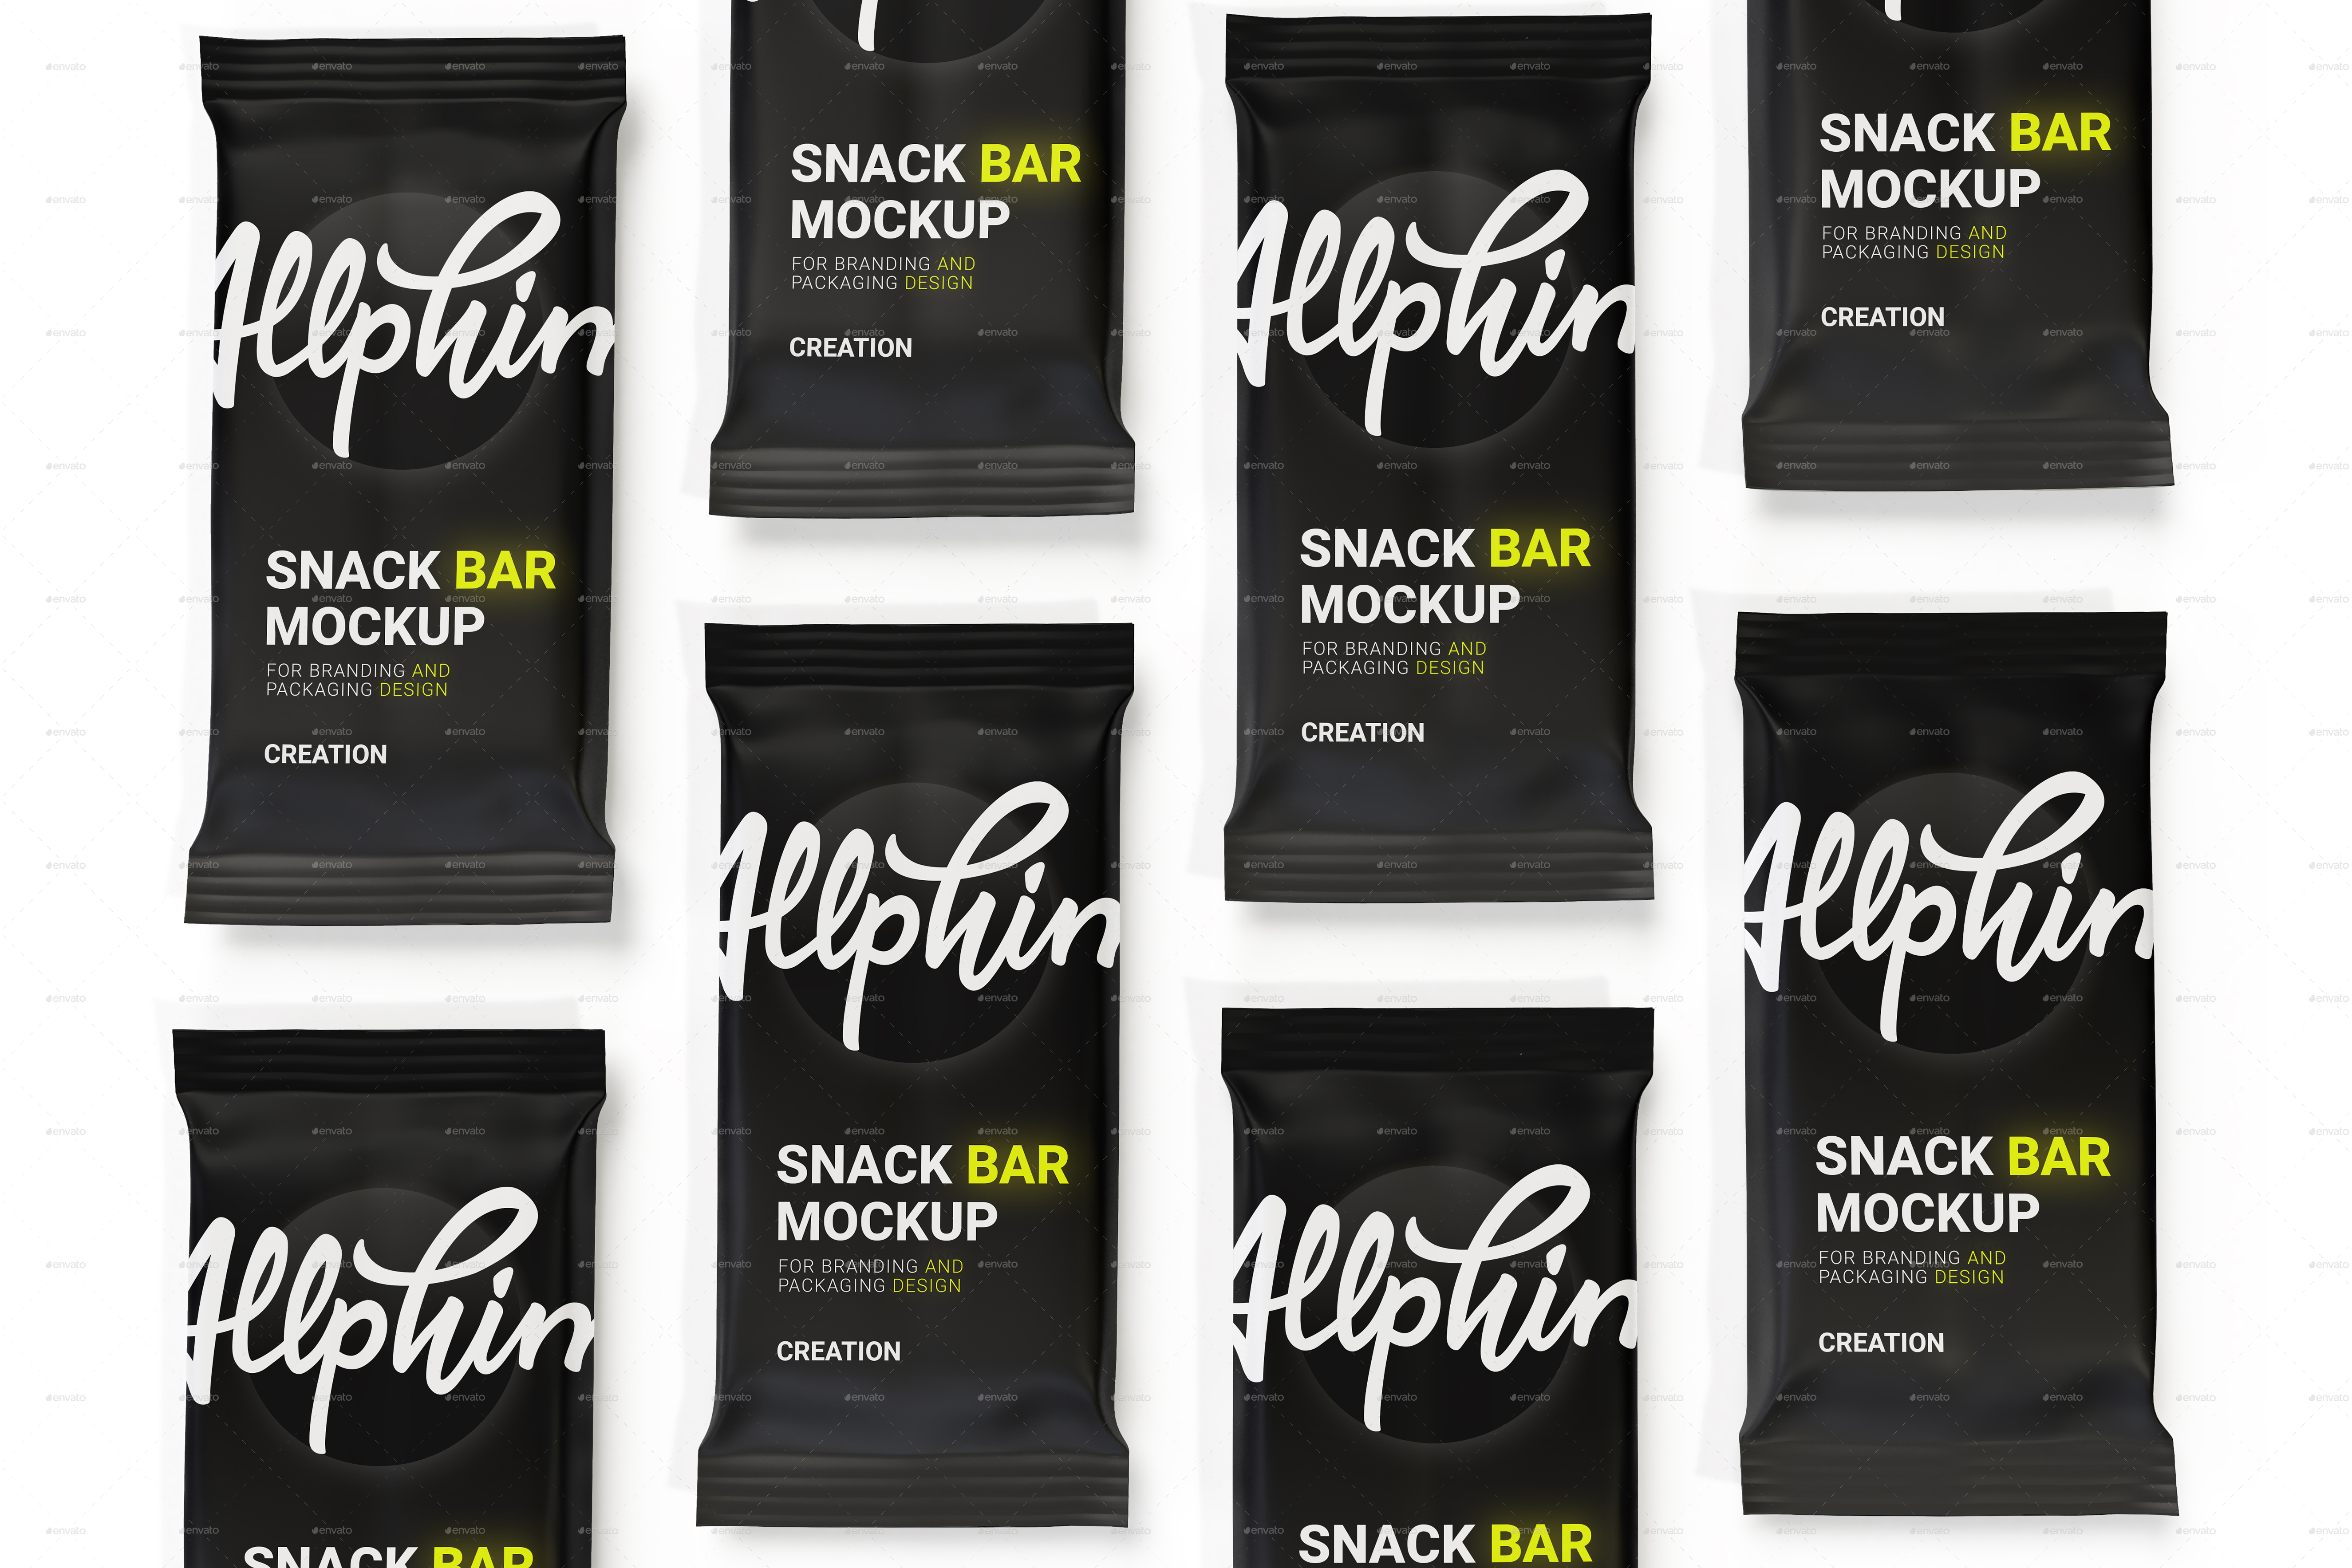 Download Snack Bar Mockup - Candy, Protein, Chocolate Bar by allphim_creation